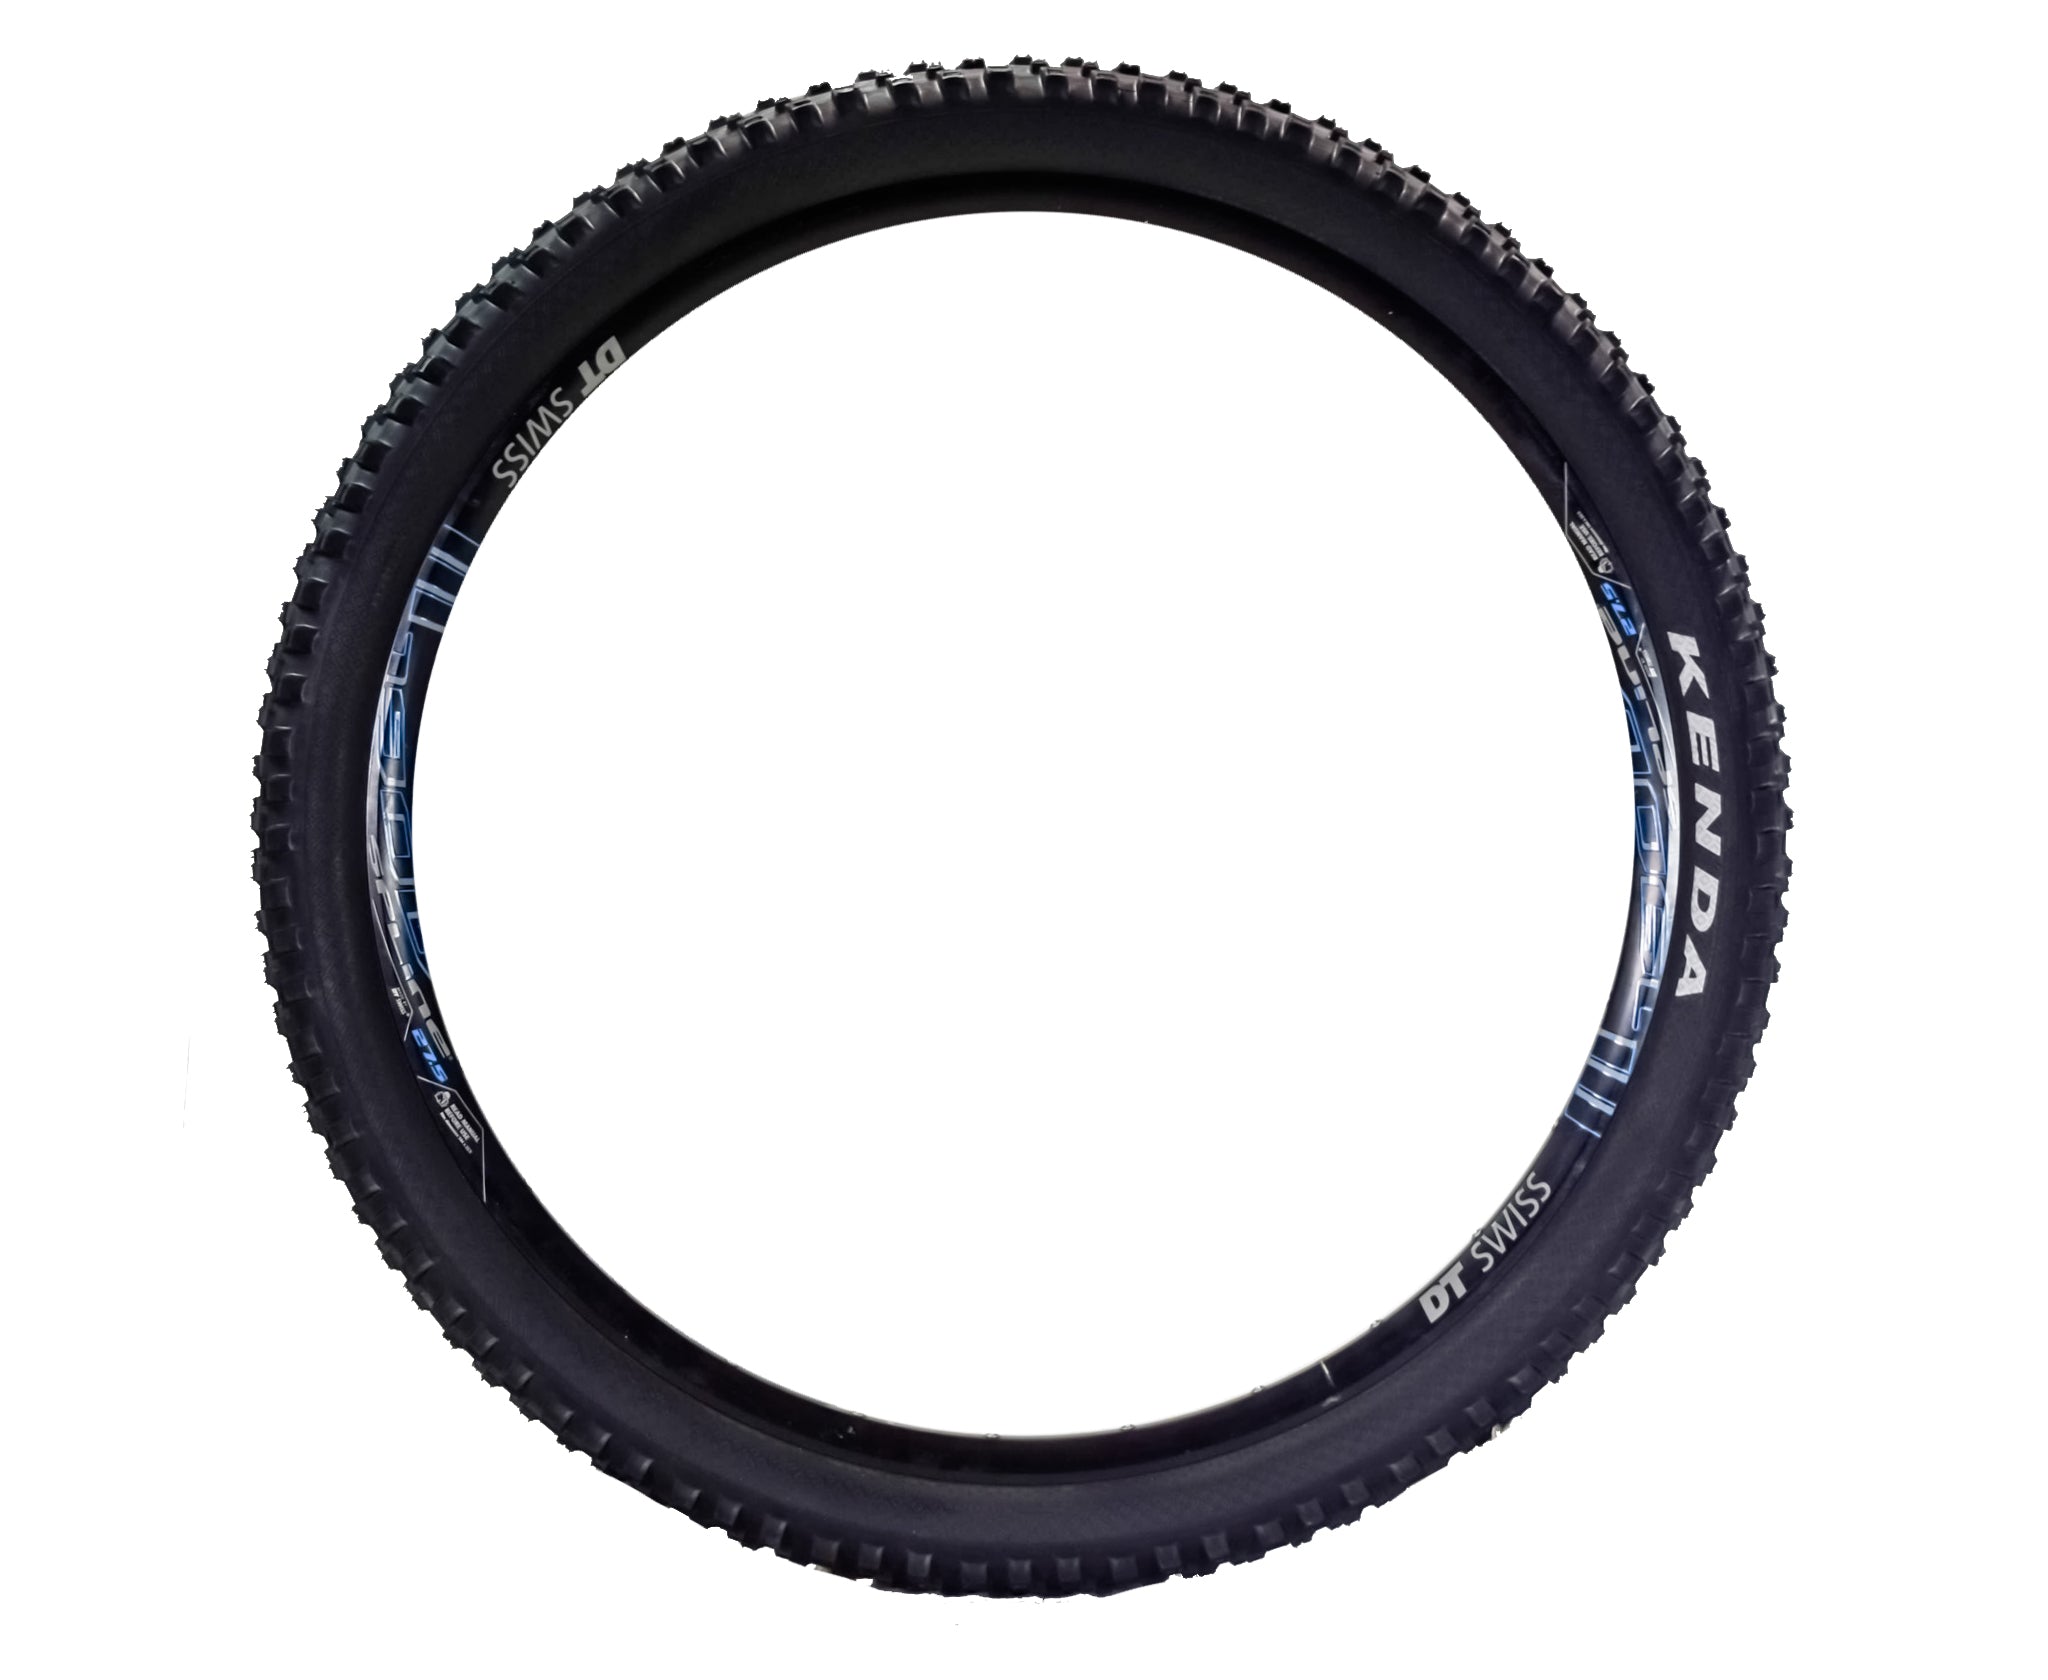 Nevegal 2 Pro ATC 120tpi Fold 27.5x2.60 27.5x2.40 Enduro Racing and Trail Bicycle Tire, Airolution 27.5x2.40-2.80  27.5x2.00-2.40 Tube w/ Bottle Opener (Two Pack)